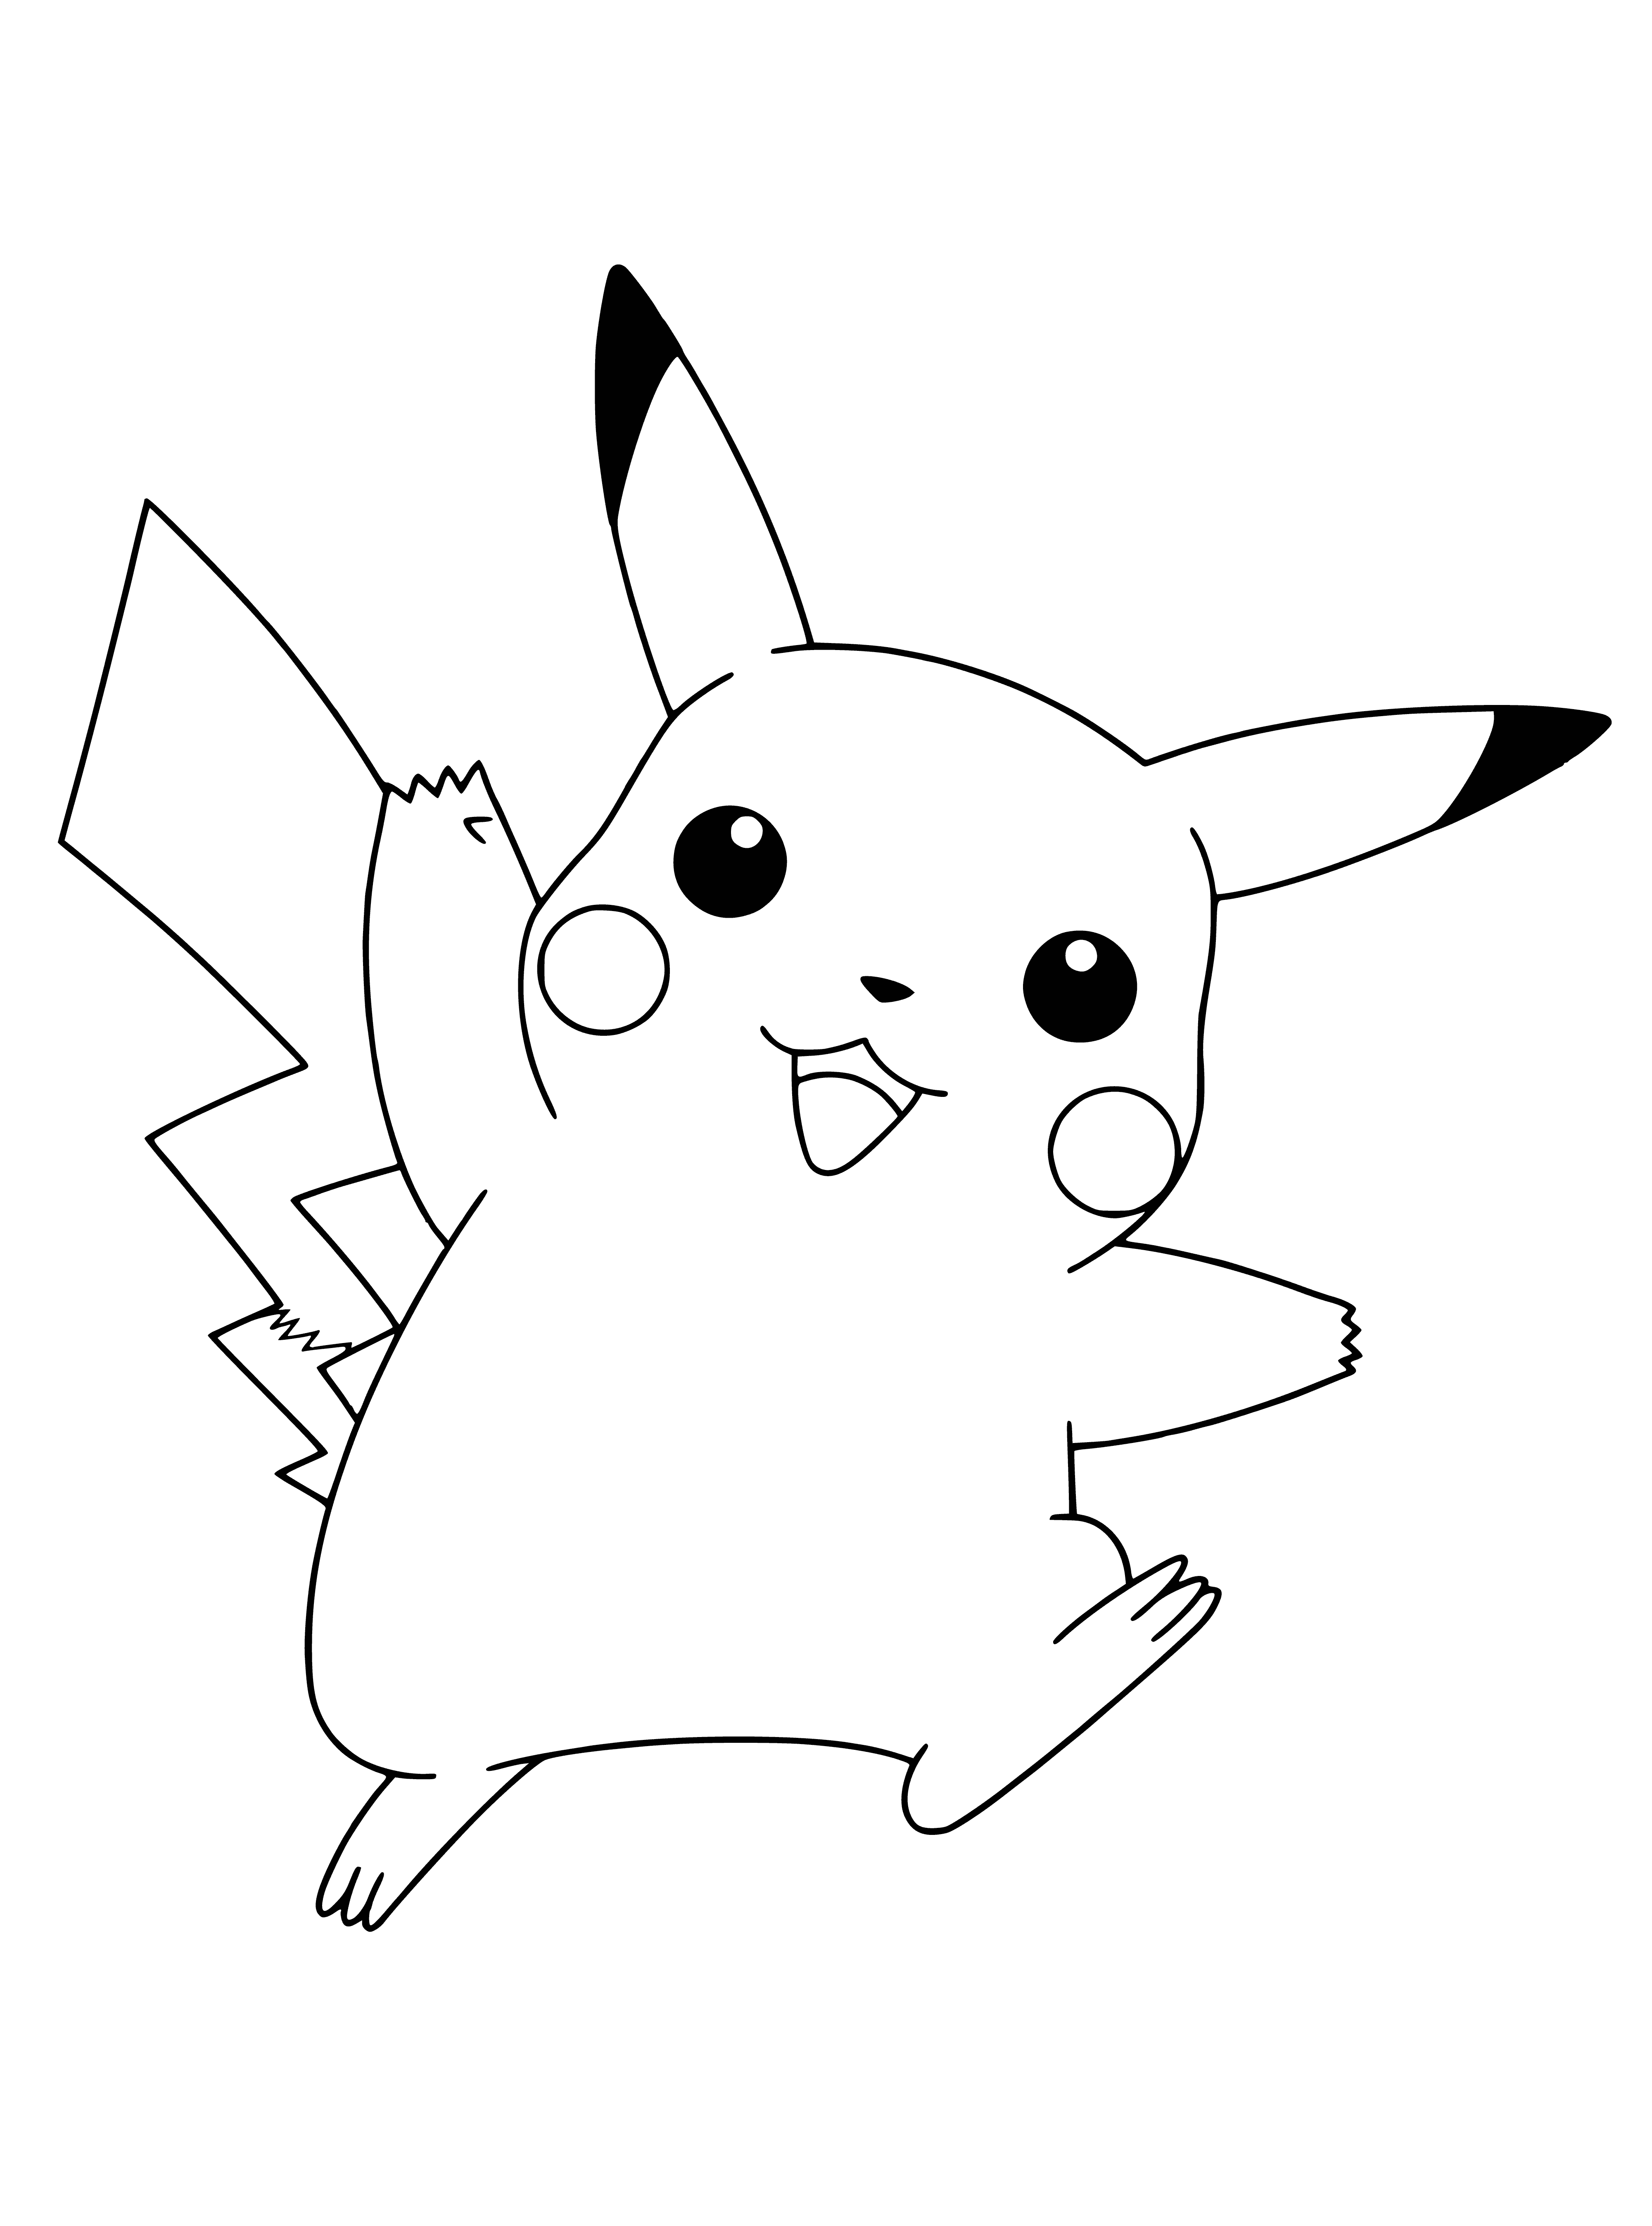 coloring page: Pikachu has black stripes, lightning-bolt tail, red cheeks, & pointy ears. Standing on its hind legs, it raises its paws in the air.